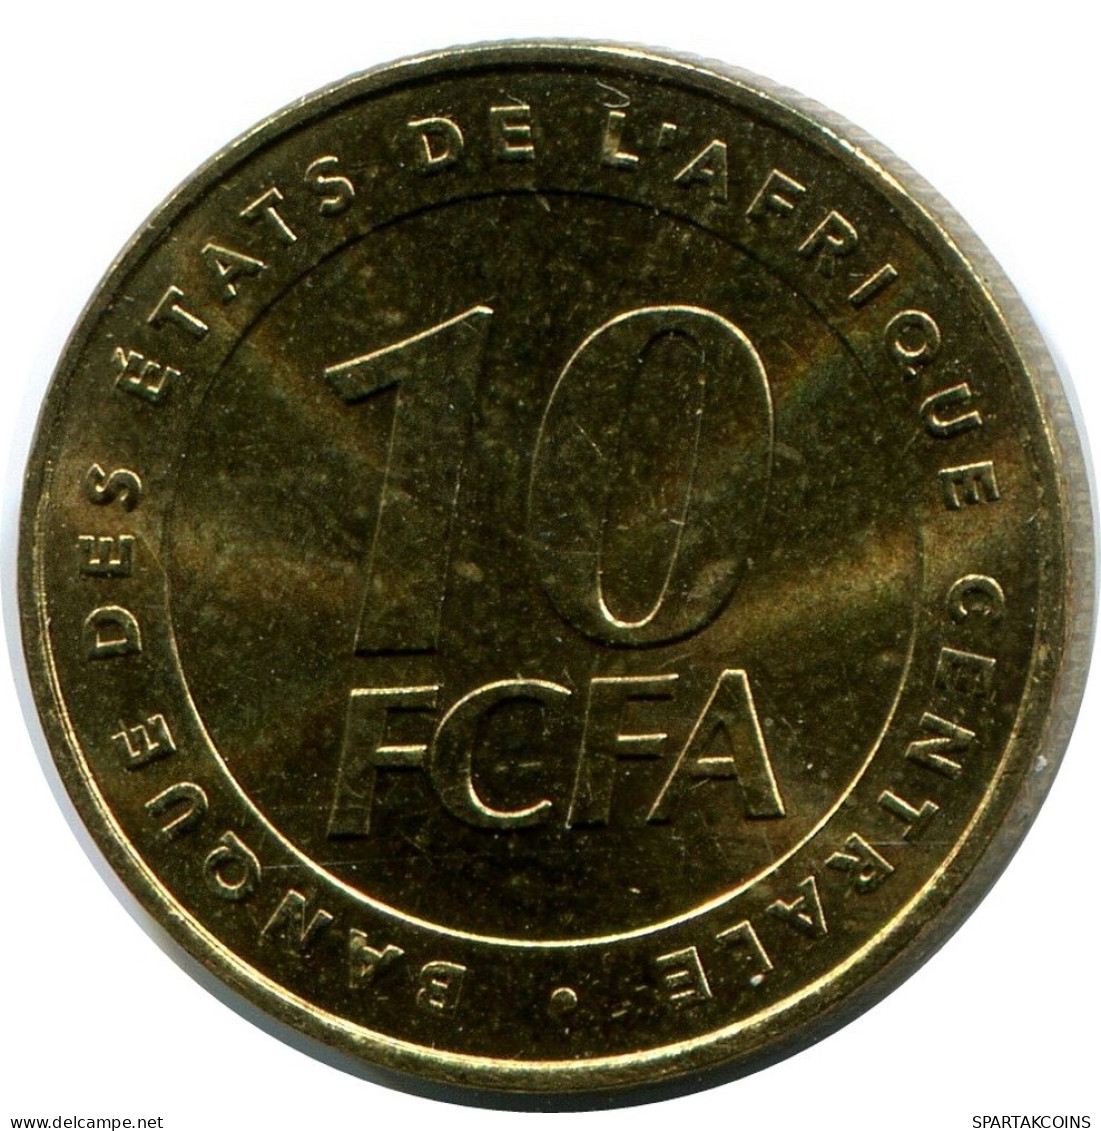 10 FRANCS CFA 2006 CENTRAL AFRICAN STATES (BEAC) Münze #AP862.D.A - Central African Republic